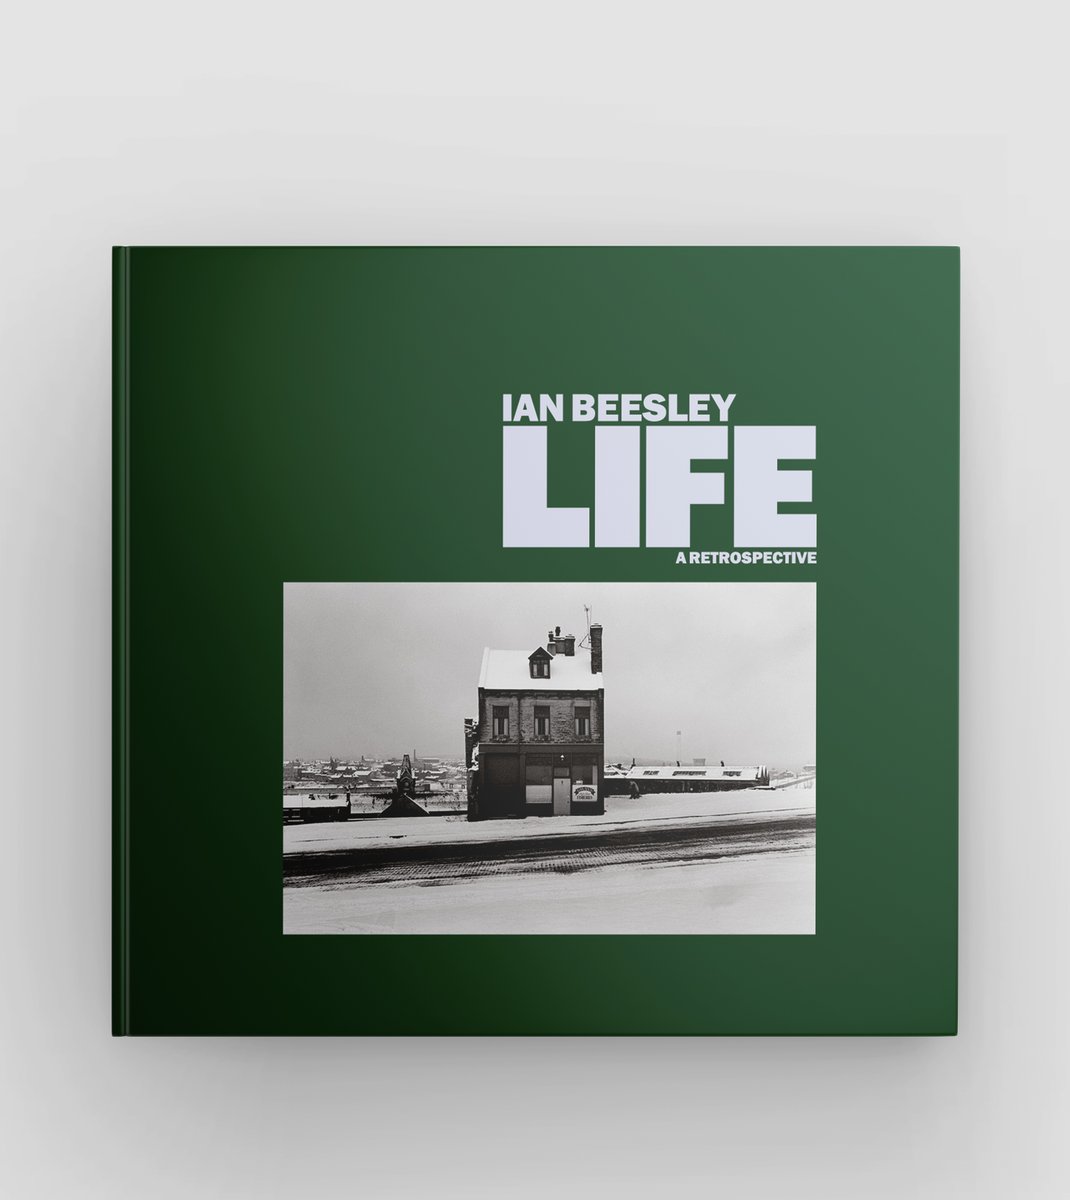 second edition of Life with new cover now available from bluecoatpress.co.uk/product/life-2/ and @SaltsMill